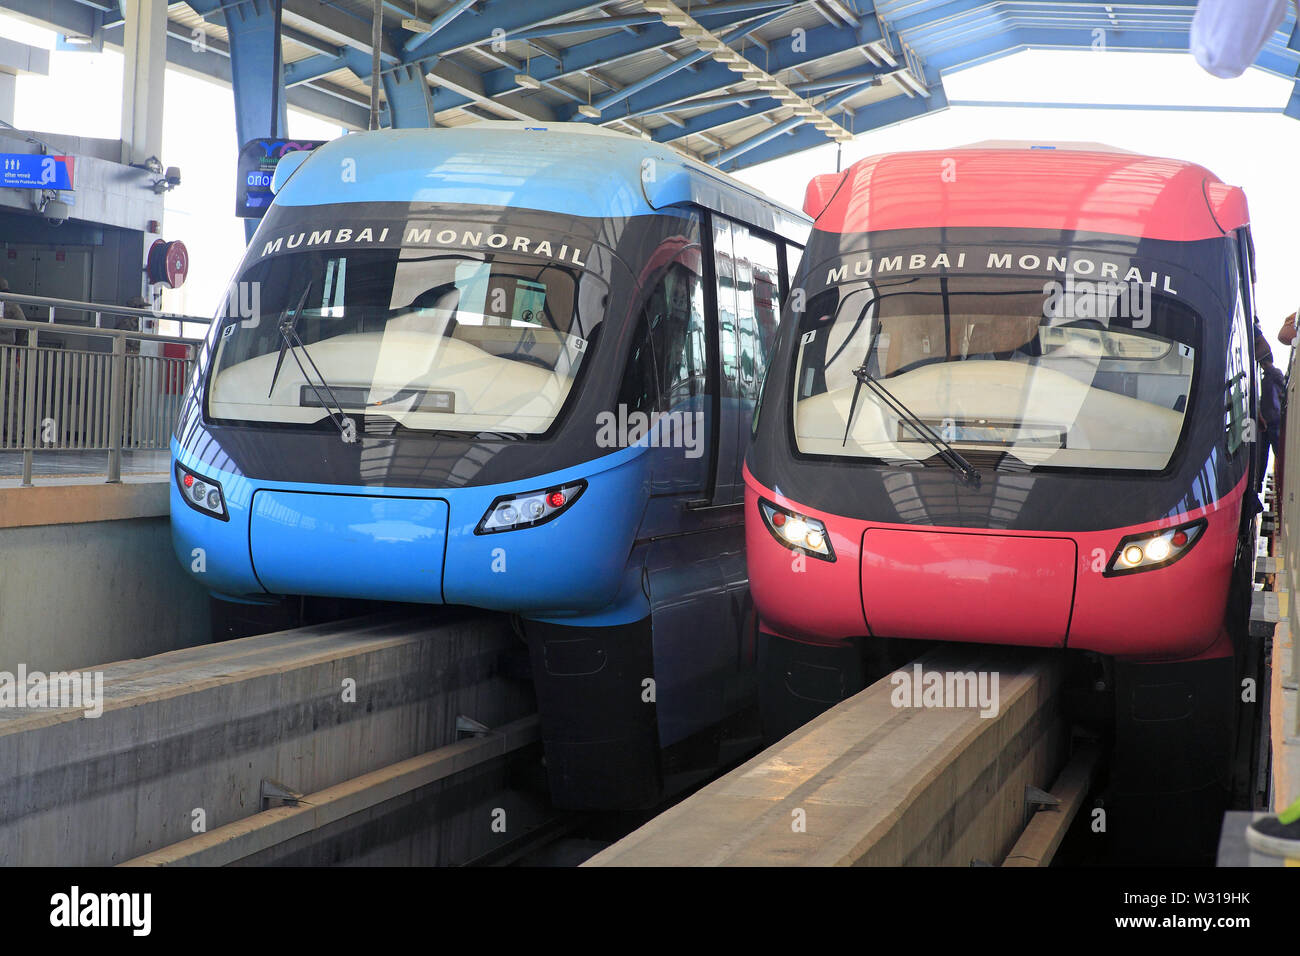 Mumbai, Maharashtra, India. 30th Jan, 2014. 30 jan 2014 : Mumbai, INDIA.The Monorail Public mass rapid transport system at Mumbai . Many of India's cities are pushing forward with huge investments in better public transport facilities like Metro Railway & Monorail.In India the June quarter 2019 auto sales are the worst in almost two decades.Total sales of cars, SUVs and vans in Q2 declined 18.4% year-on-year, the sharpest since a 23.1% drop in Q3 of 2000-01 .Every segment of the Indian auto industry has reported a double-digit decline. A total of 712,620 cars, utility vehicles and vans Stock Photo